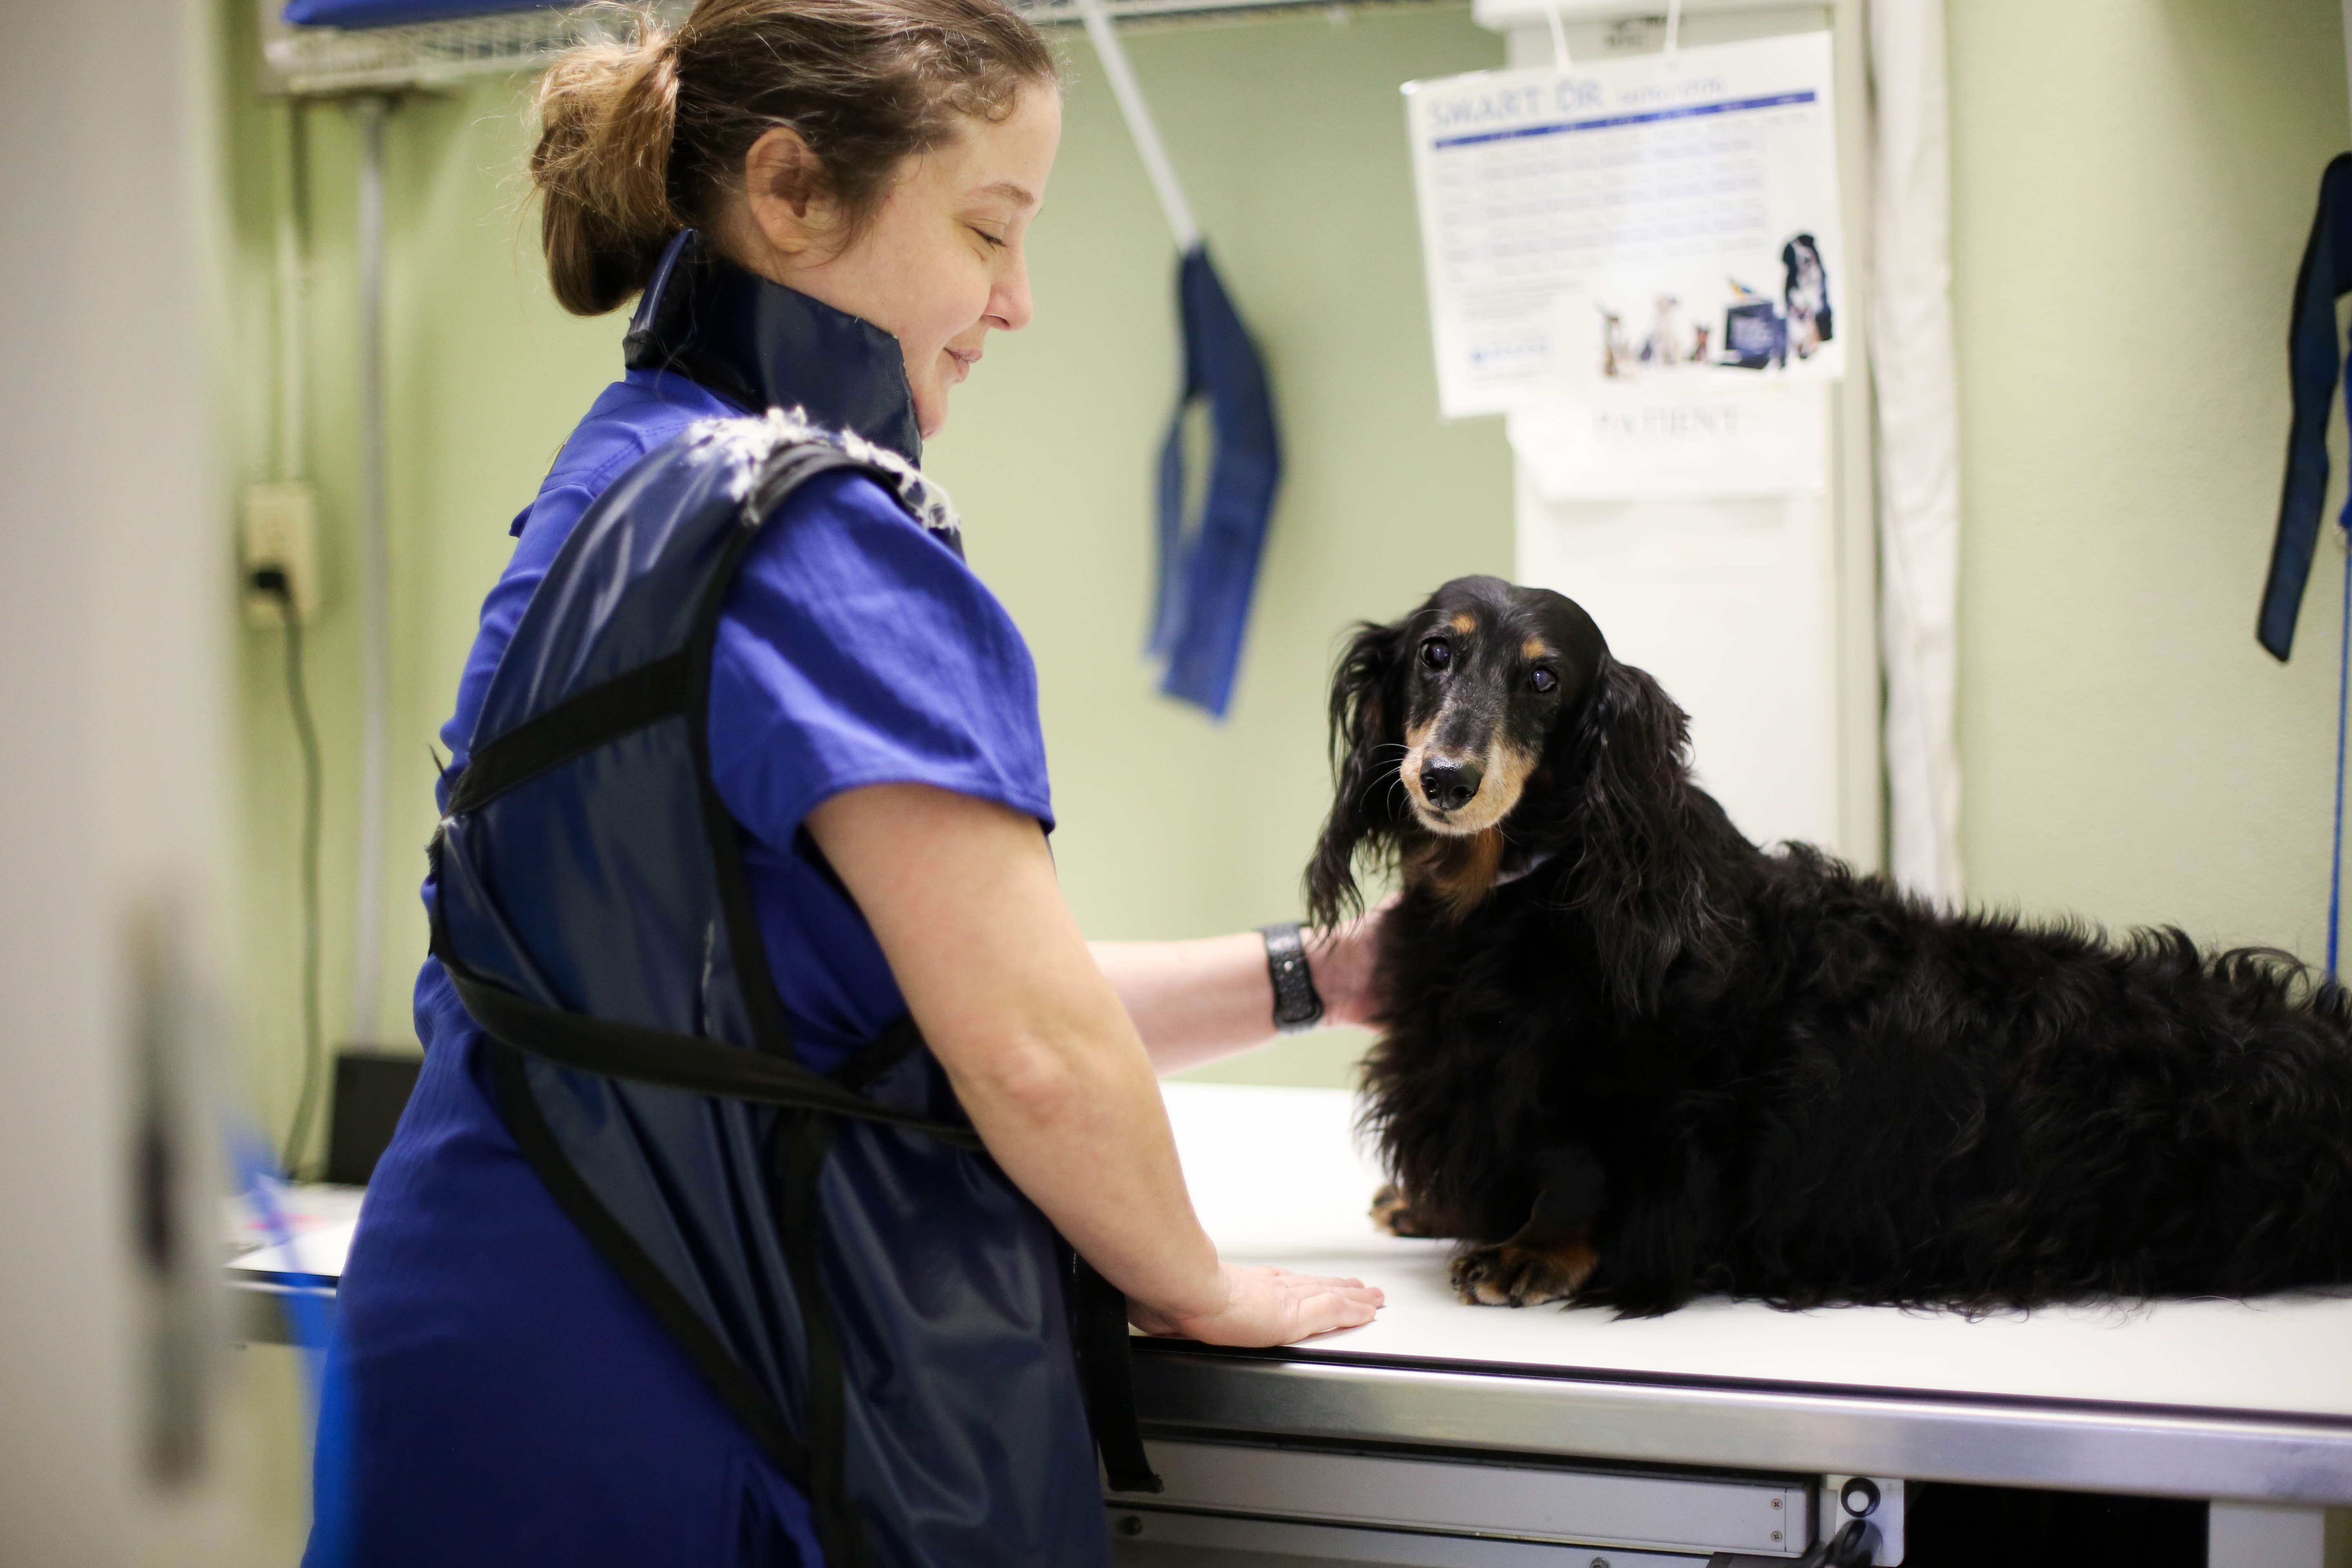 The Animal Hospital of Dunedin takes pride in our investment in some of the most advanced diagnostic technology available in our field. Digital medical radiology has made the taking of x-rays much easier and safer for both our patients and staff.